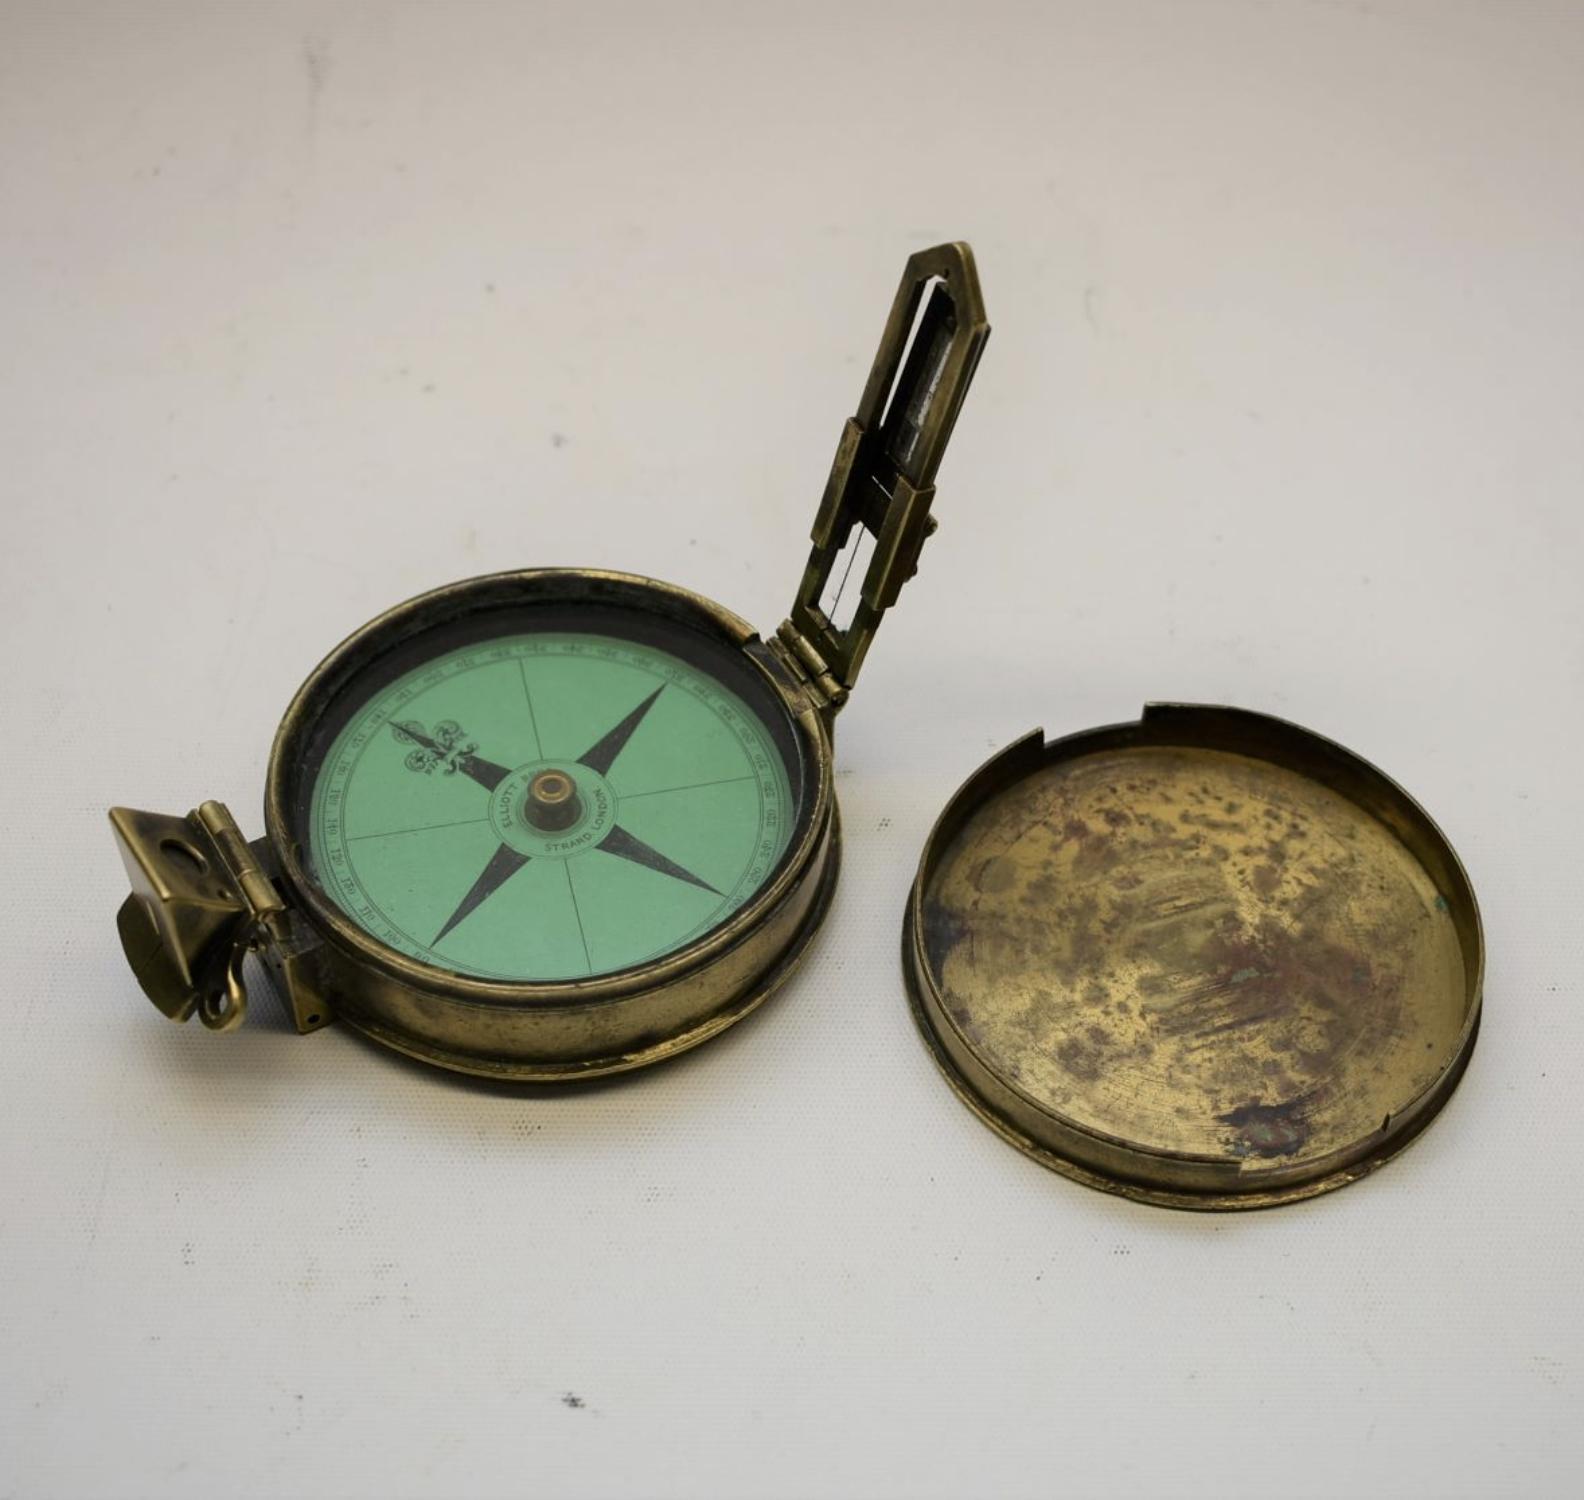 The Ship's Compass – A History